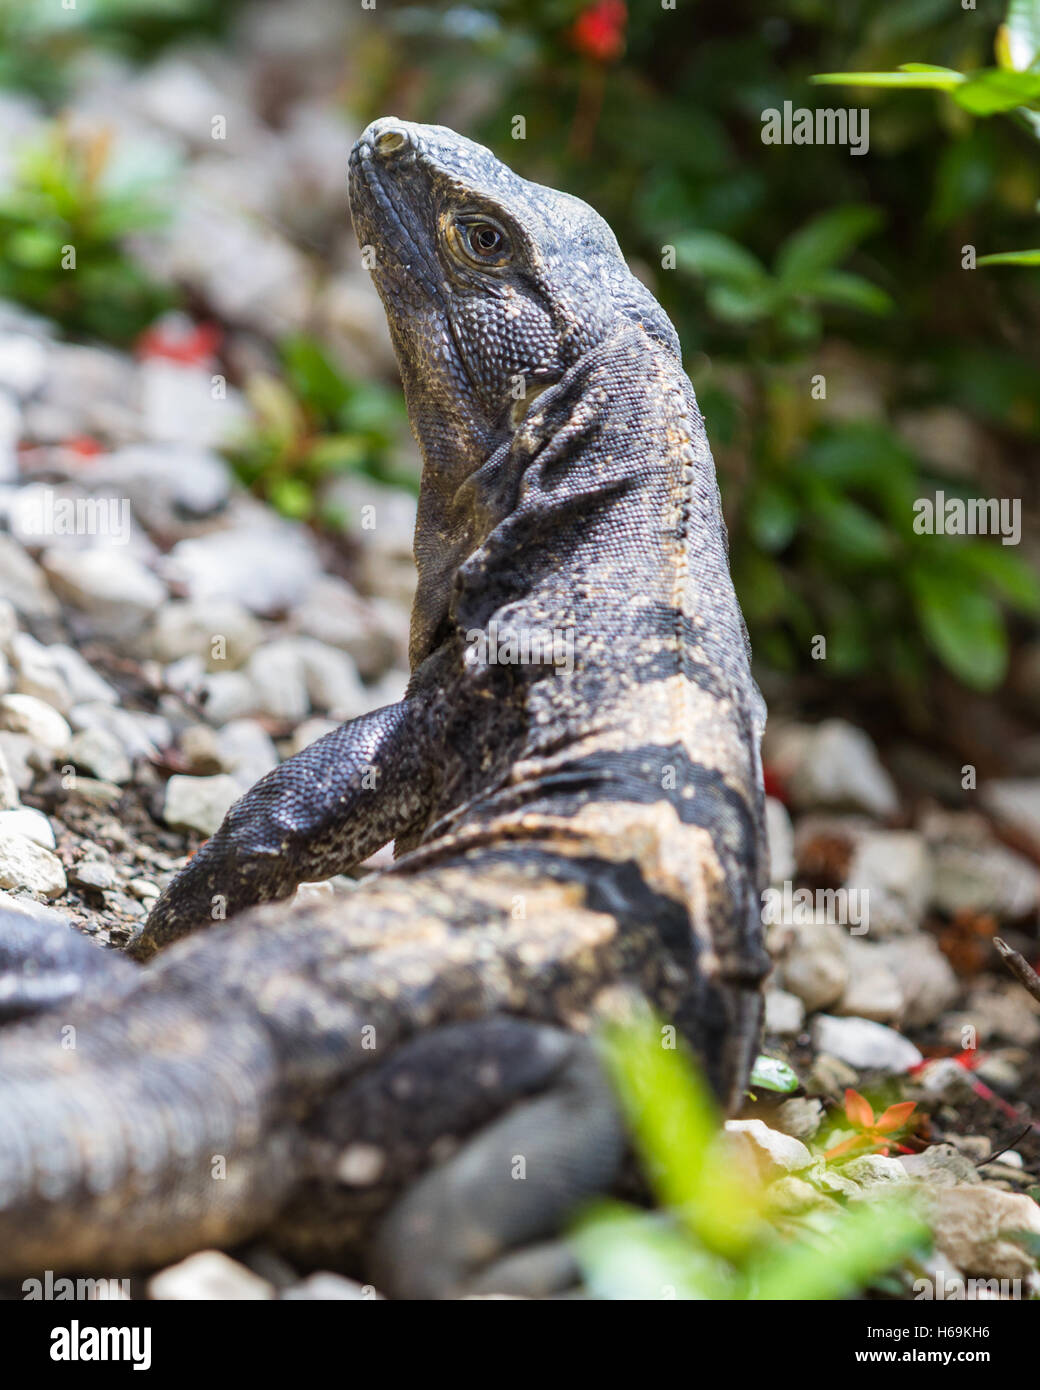 close up of a club tailed iguana walking on the ground in a rainforest of Costa Rica Stock Photo